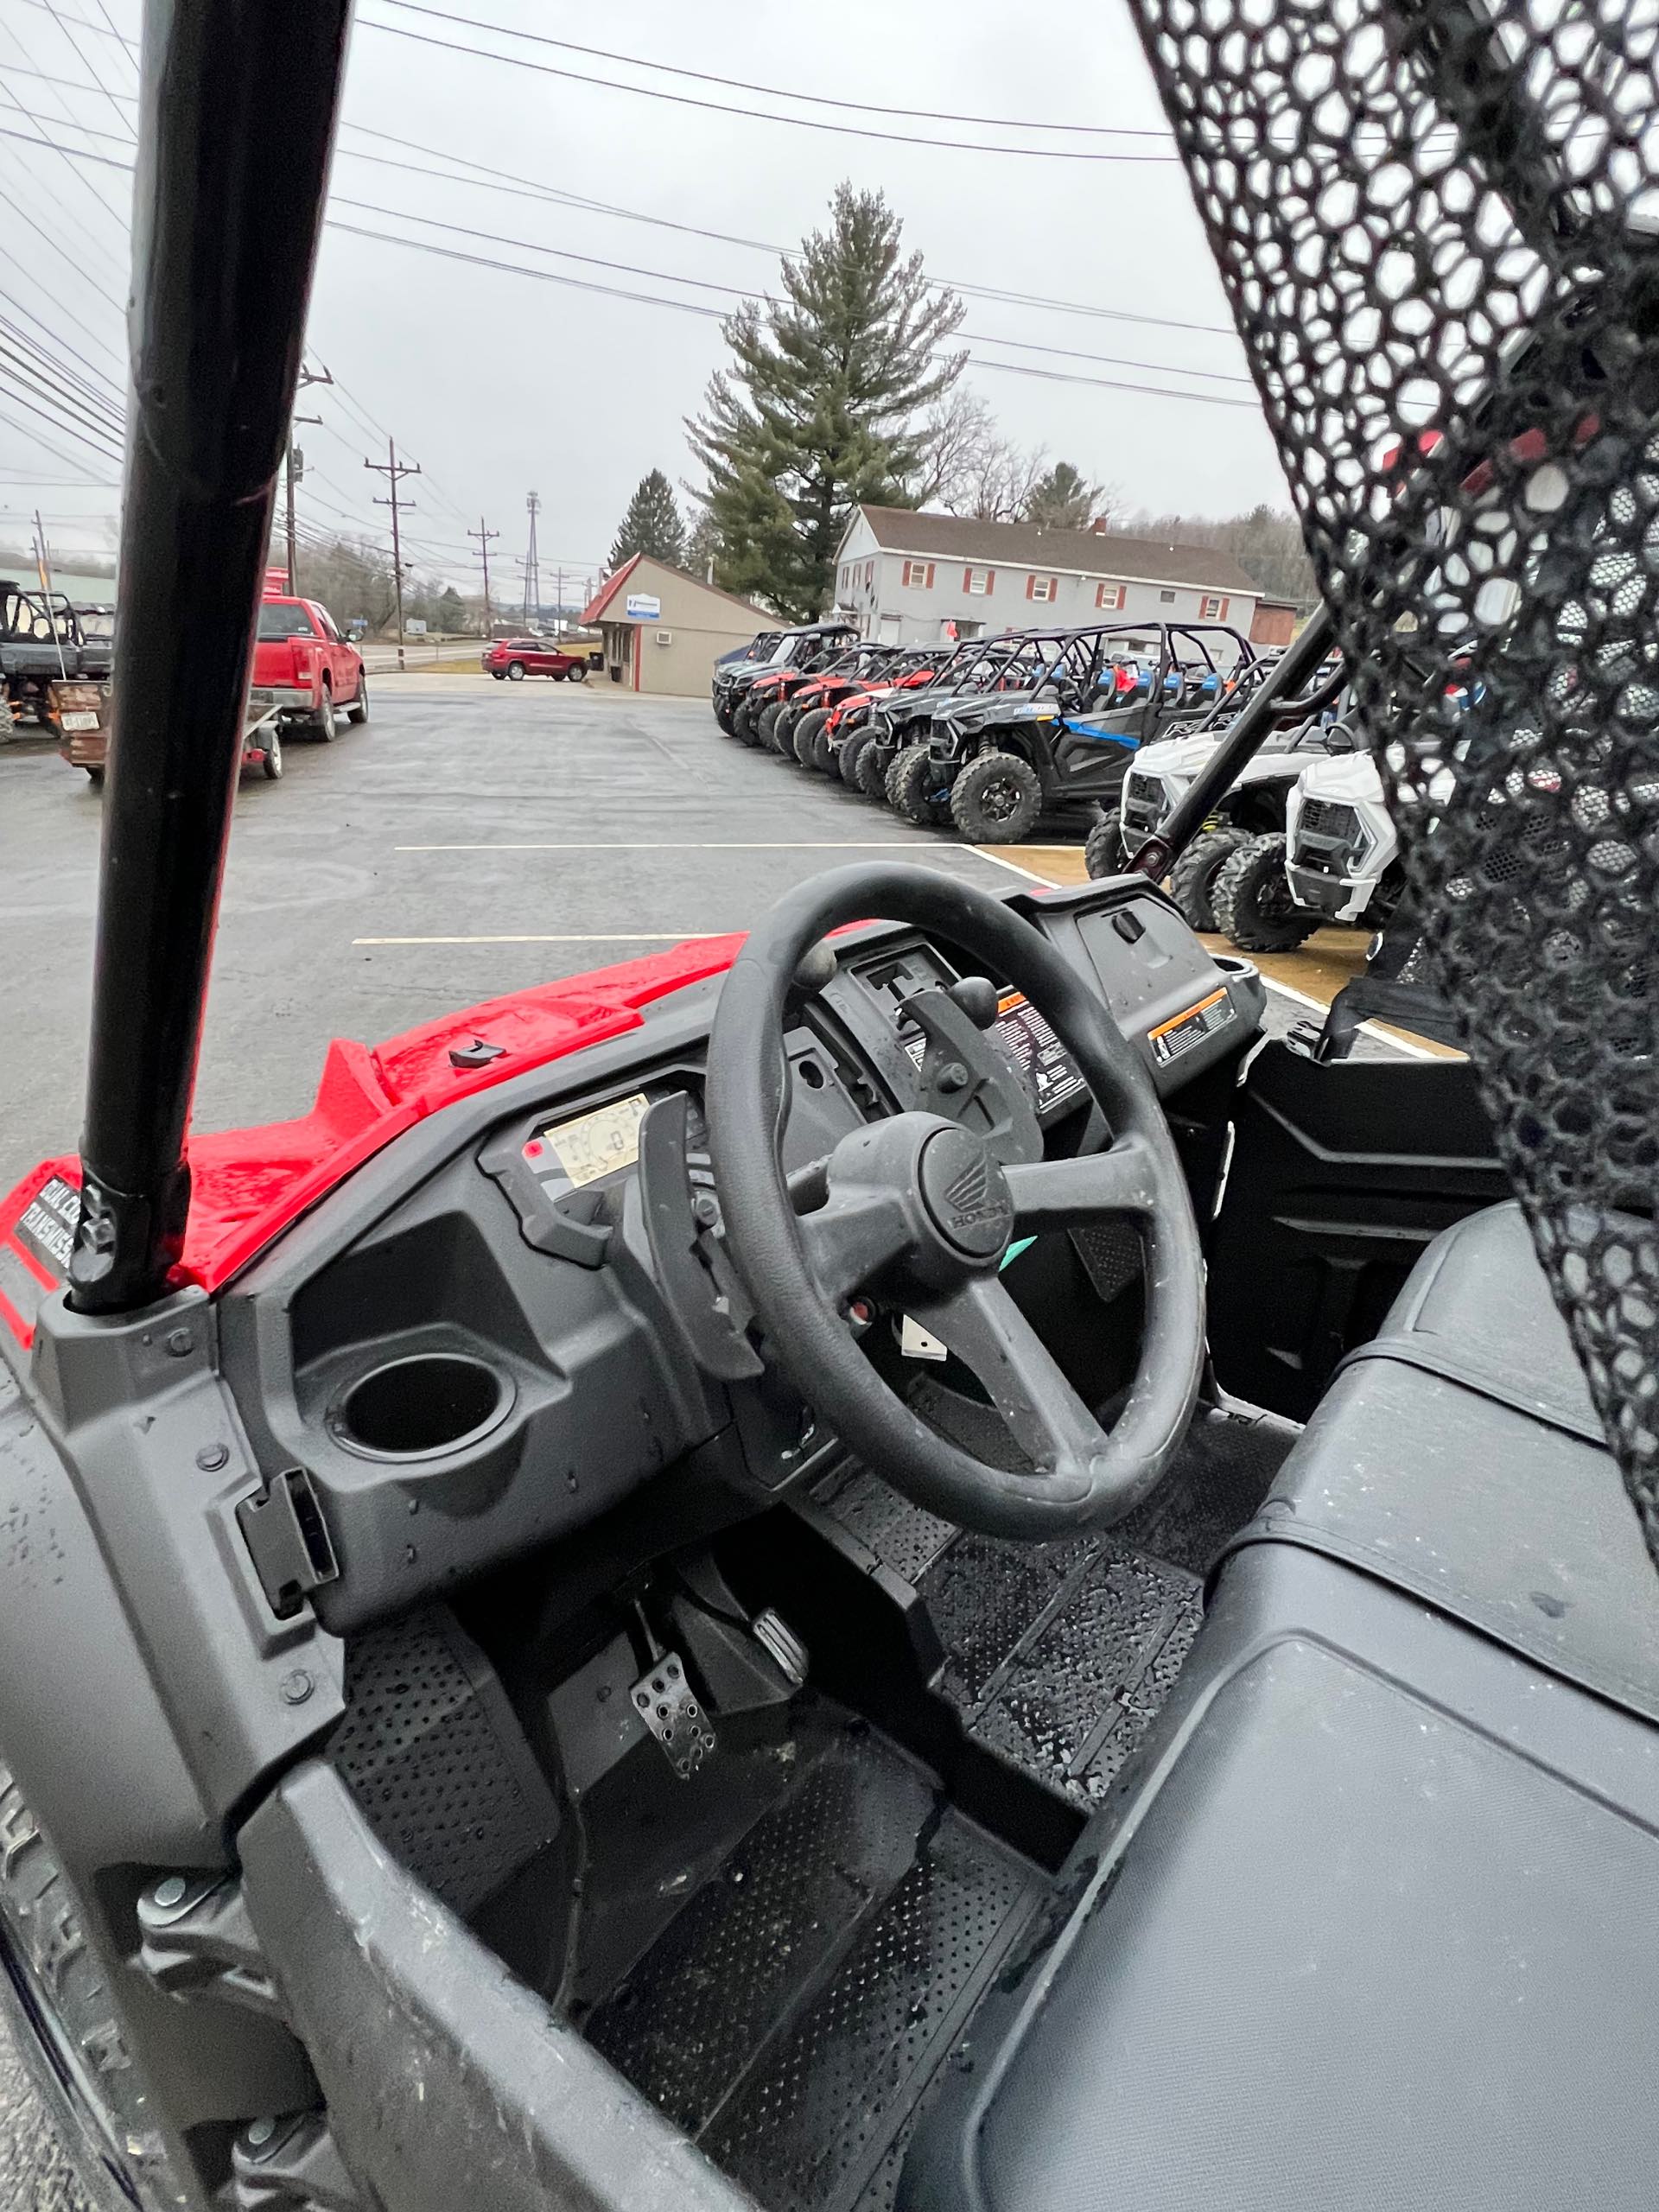 2022 Honda Pioneer 1000-5 EPS at Leisure Time Powersports of Corry